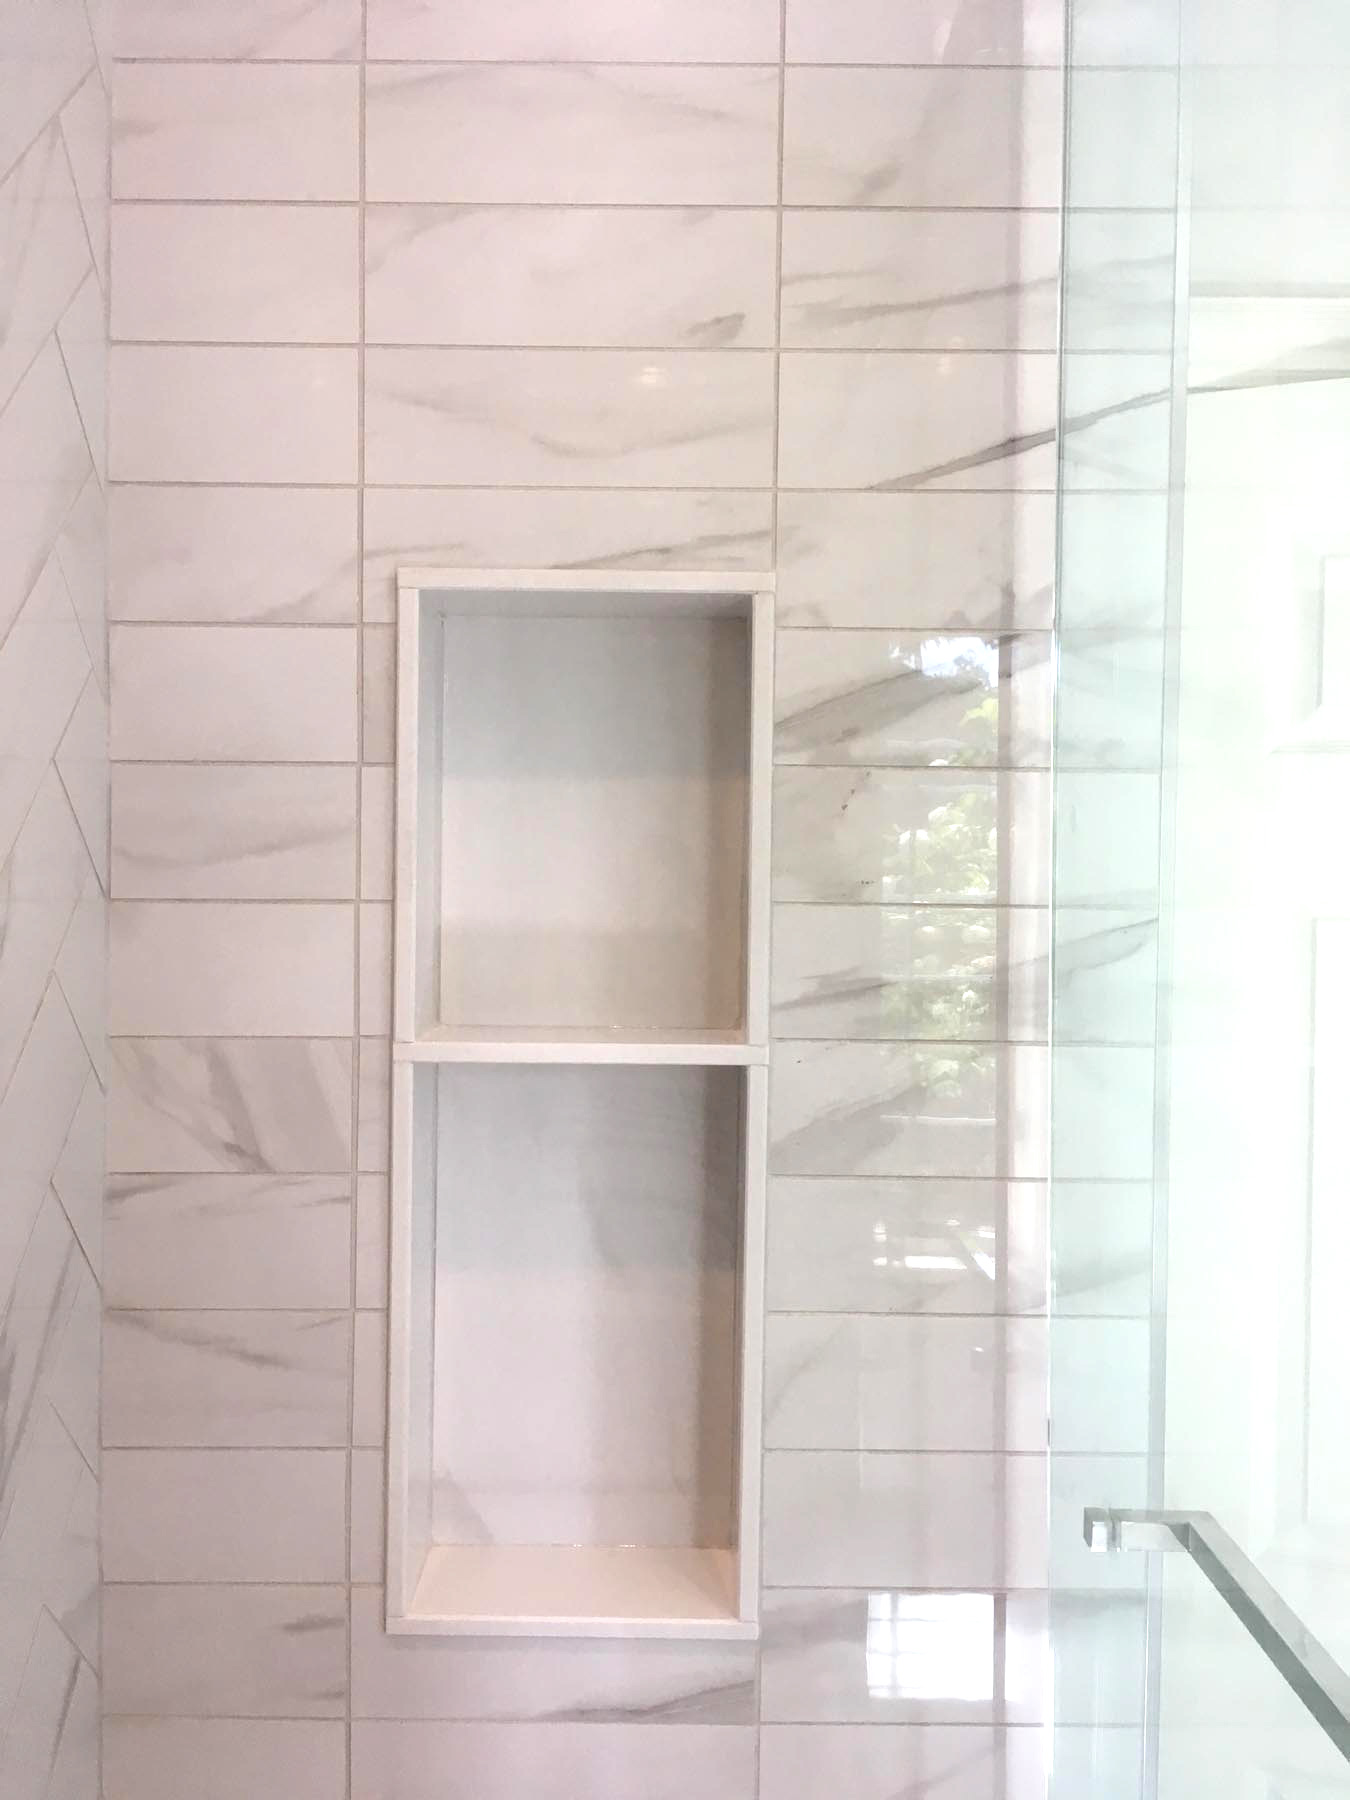 built-in shower storage done in marble